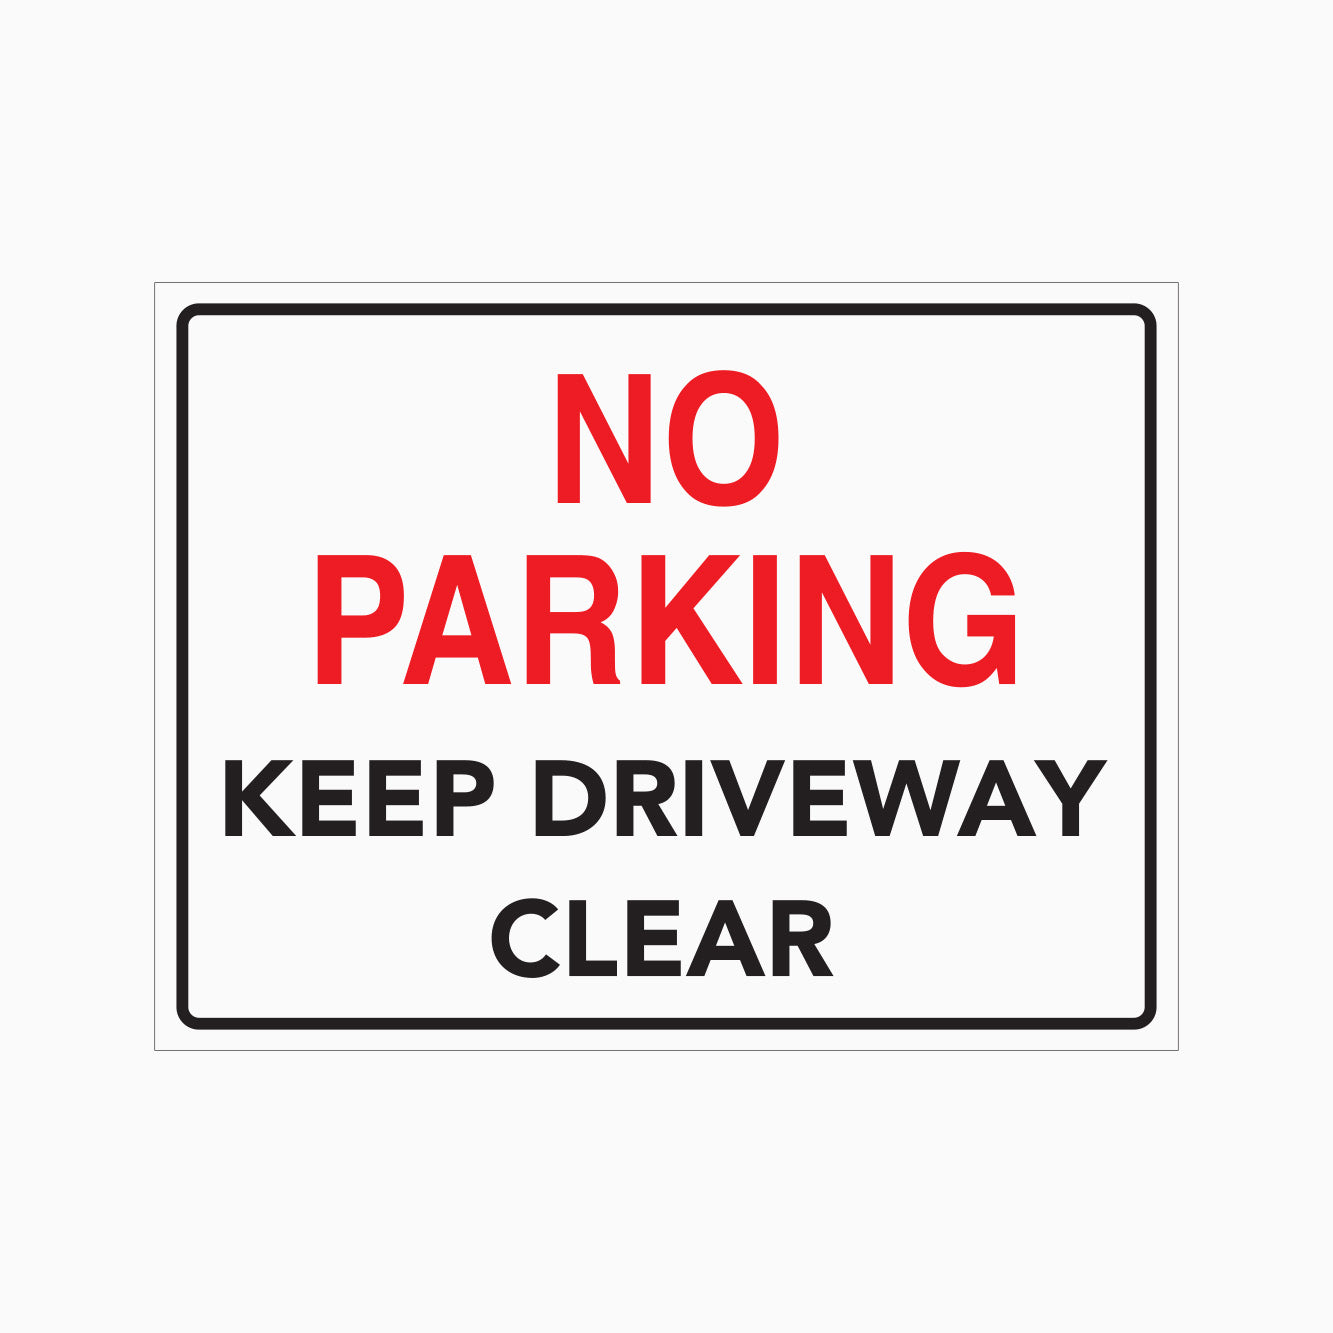 NO PARKING SIGN - KEEP DRIVEWAY CLEAR SIGN